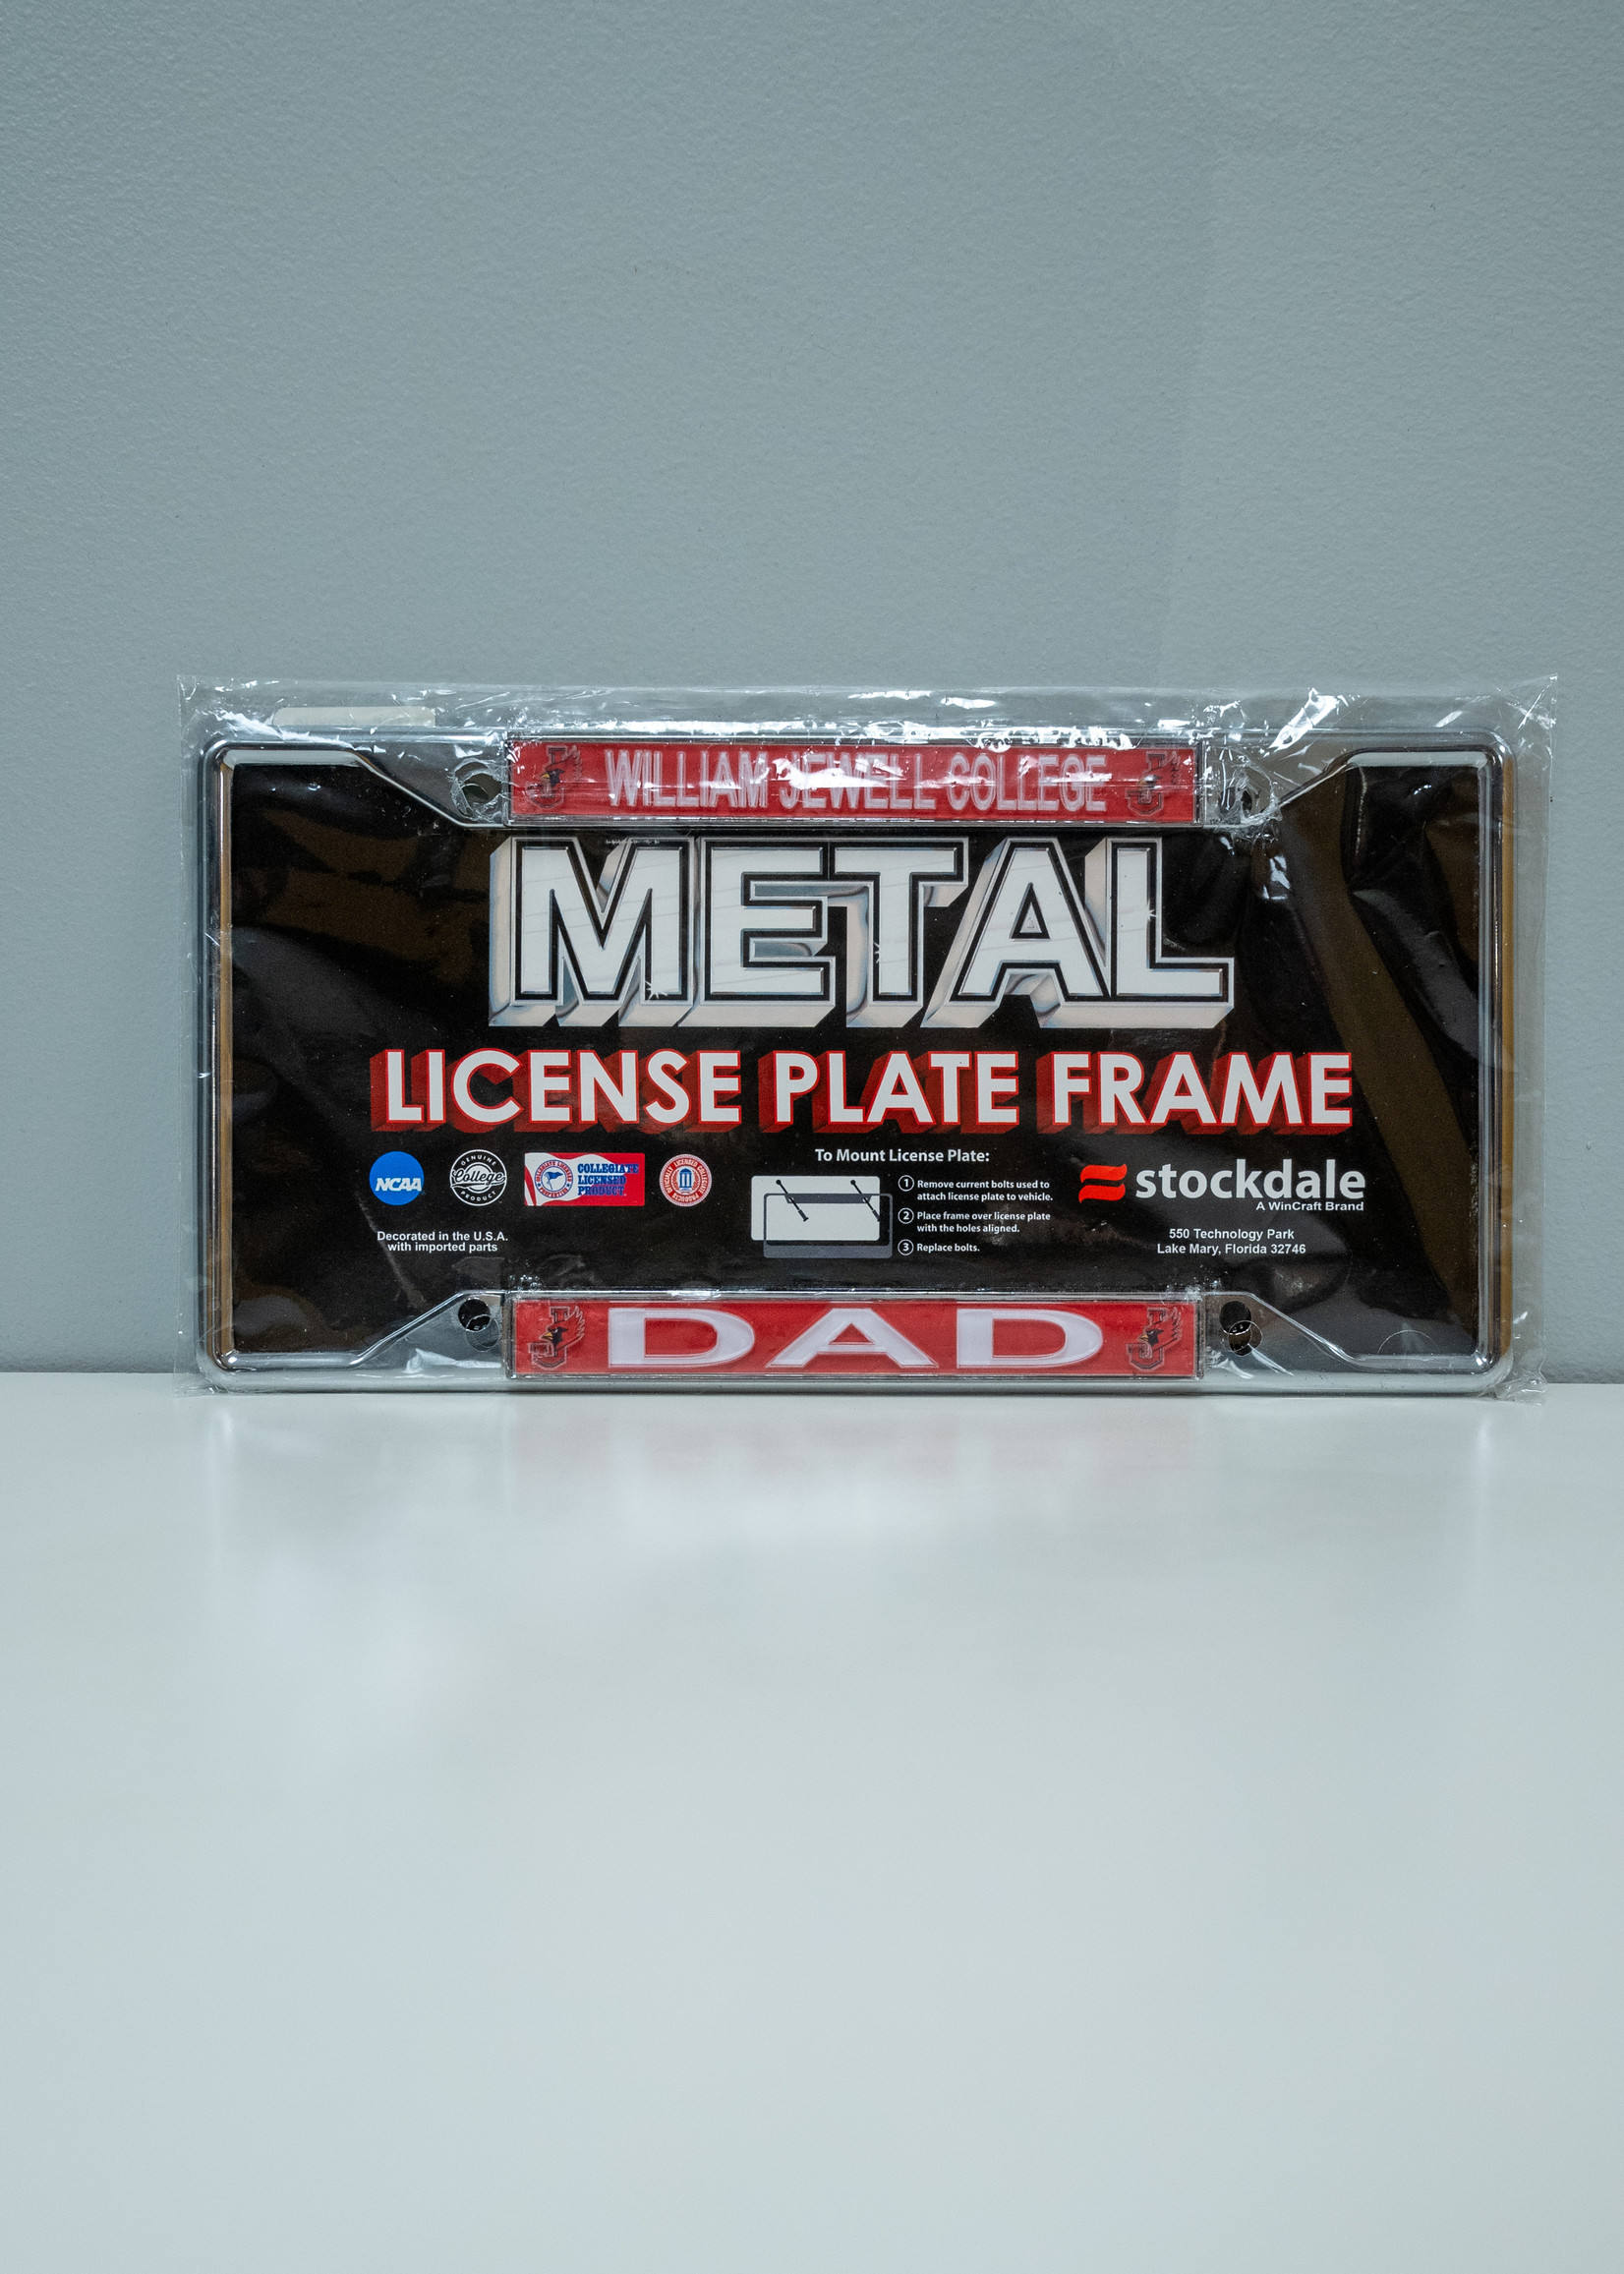 Jewell License Plate Cover / Frame